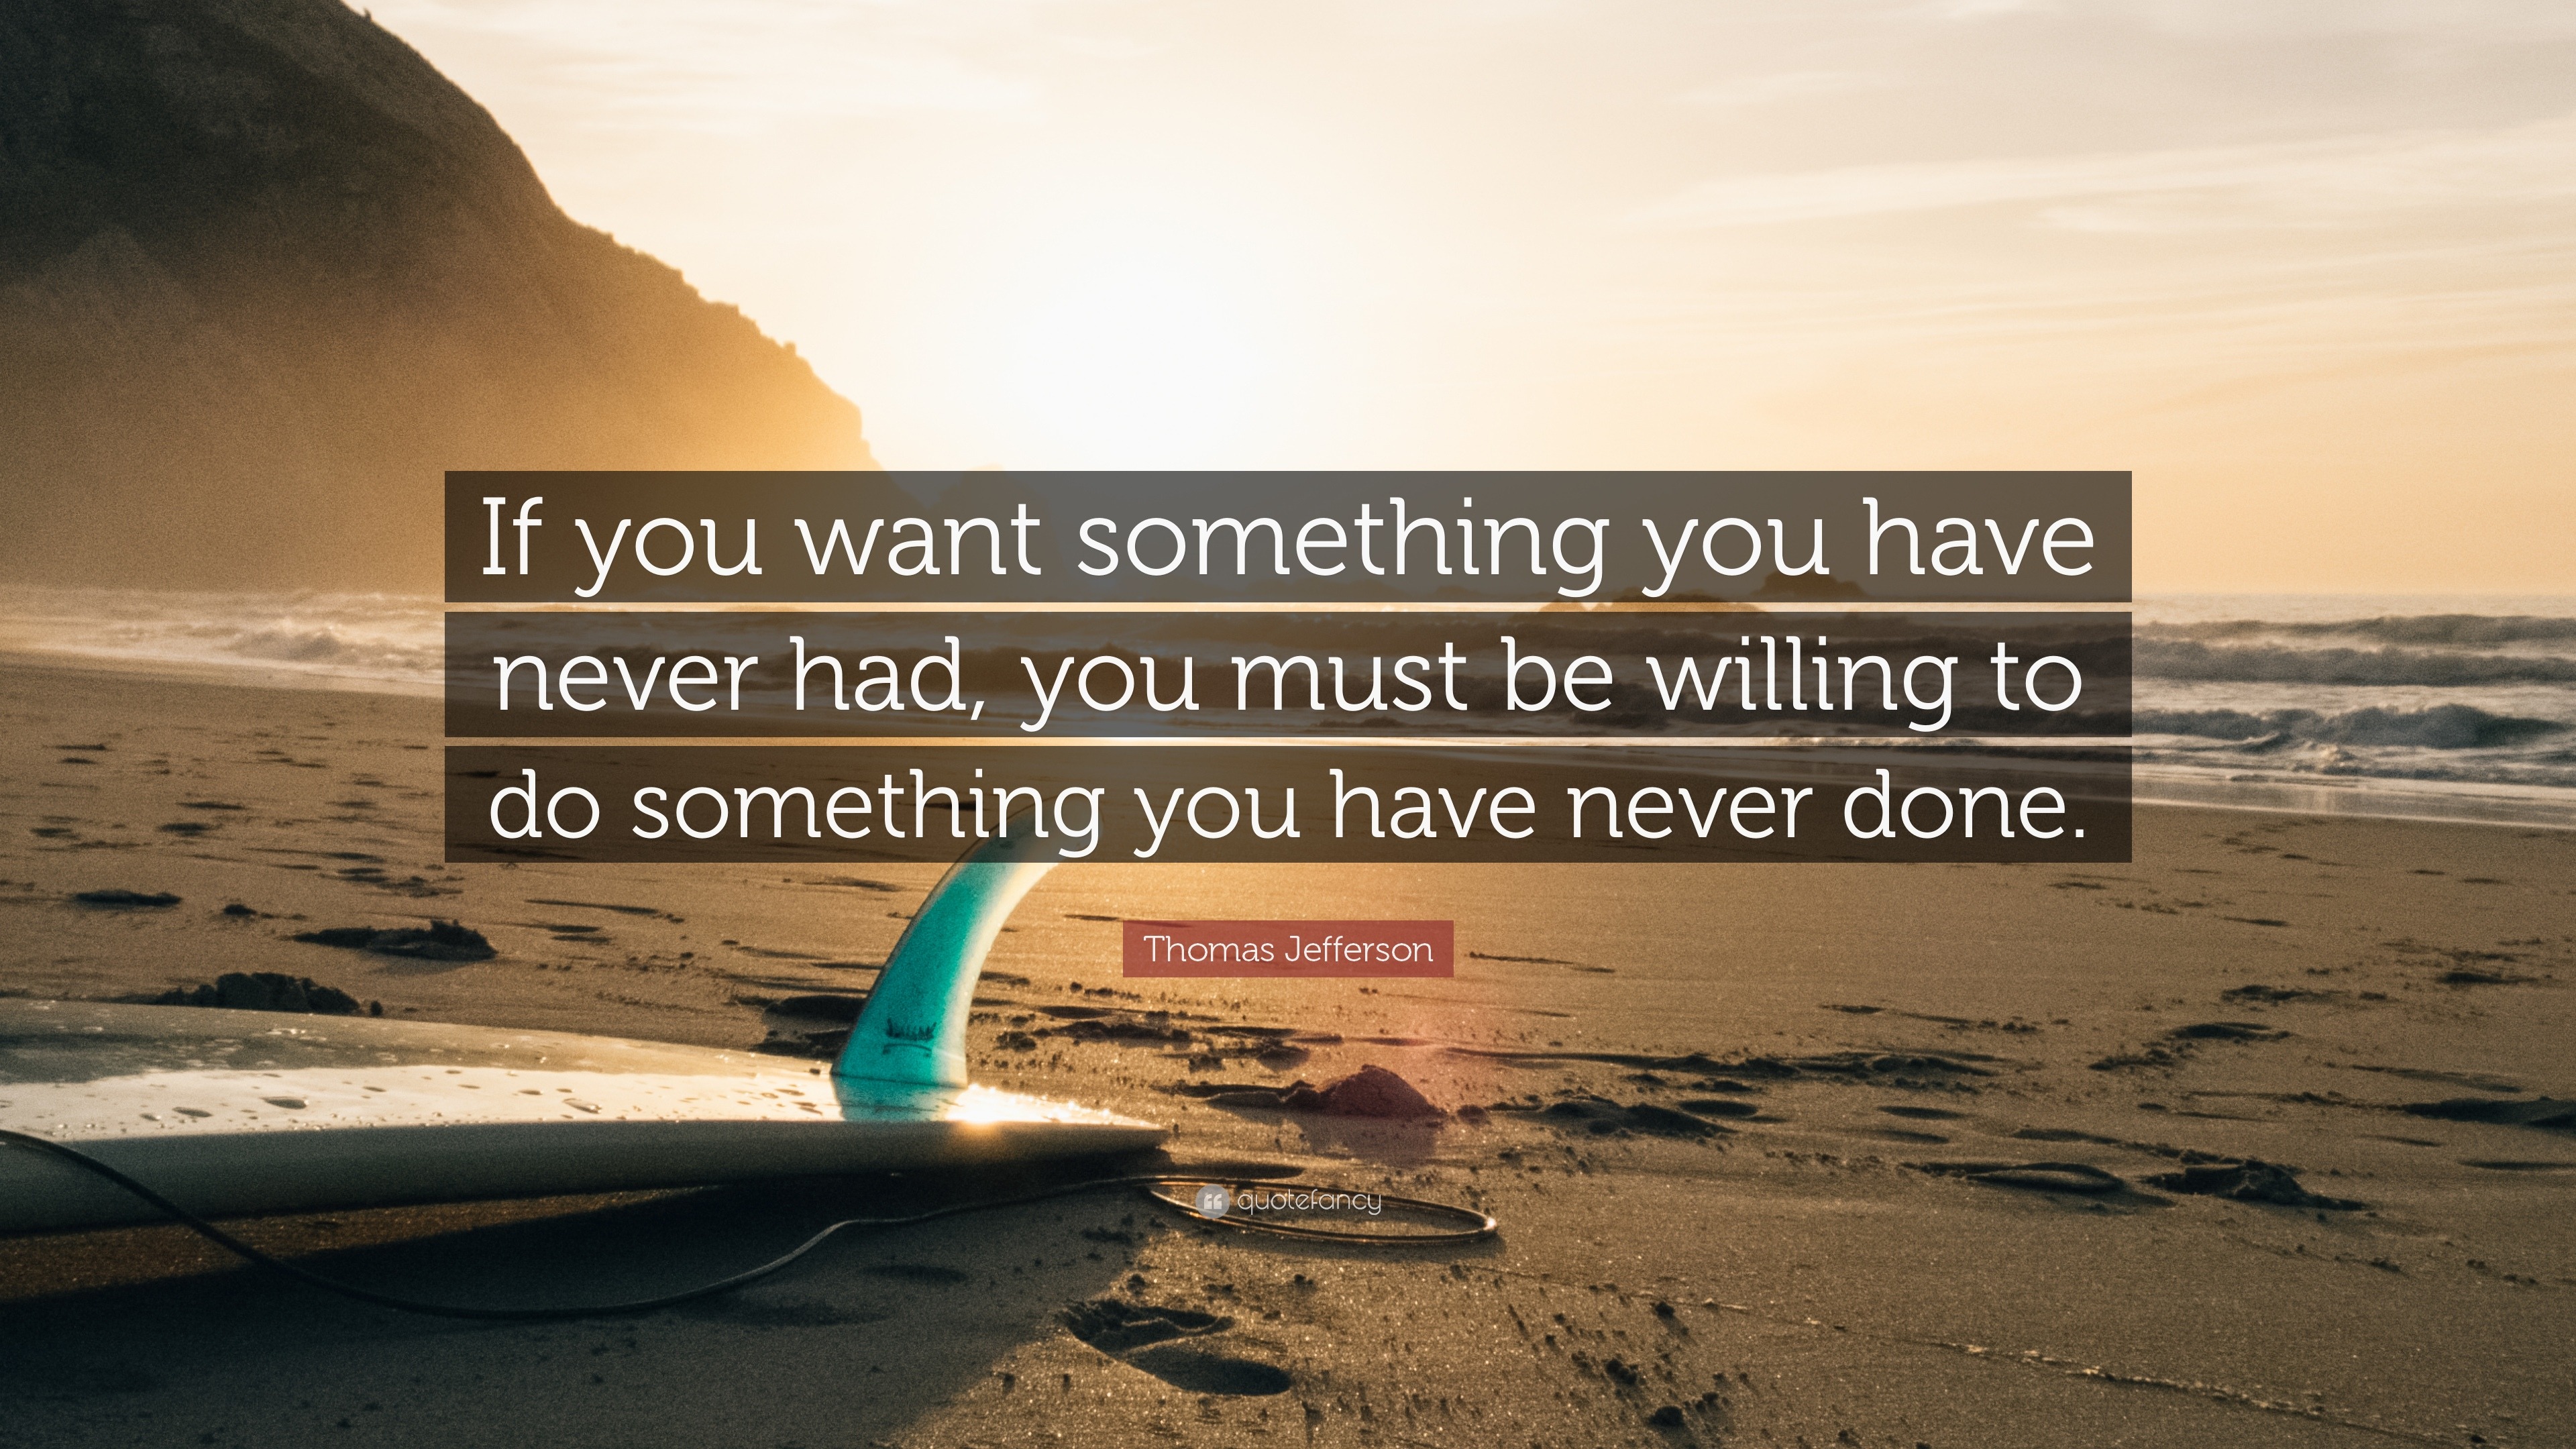 Thomas Jefferson Quote If You Want Something You Have Never Had You Must Be Willing To Do